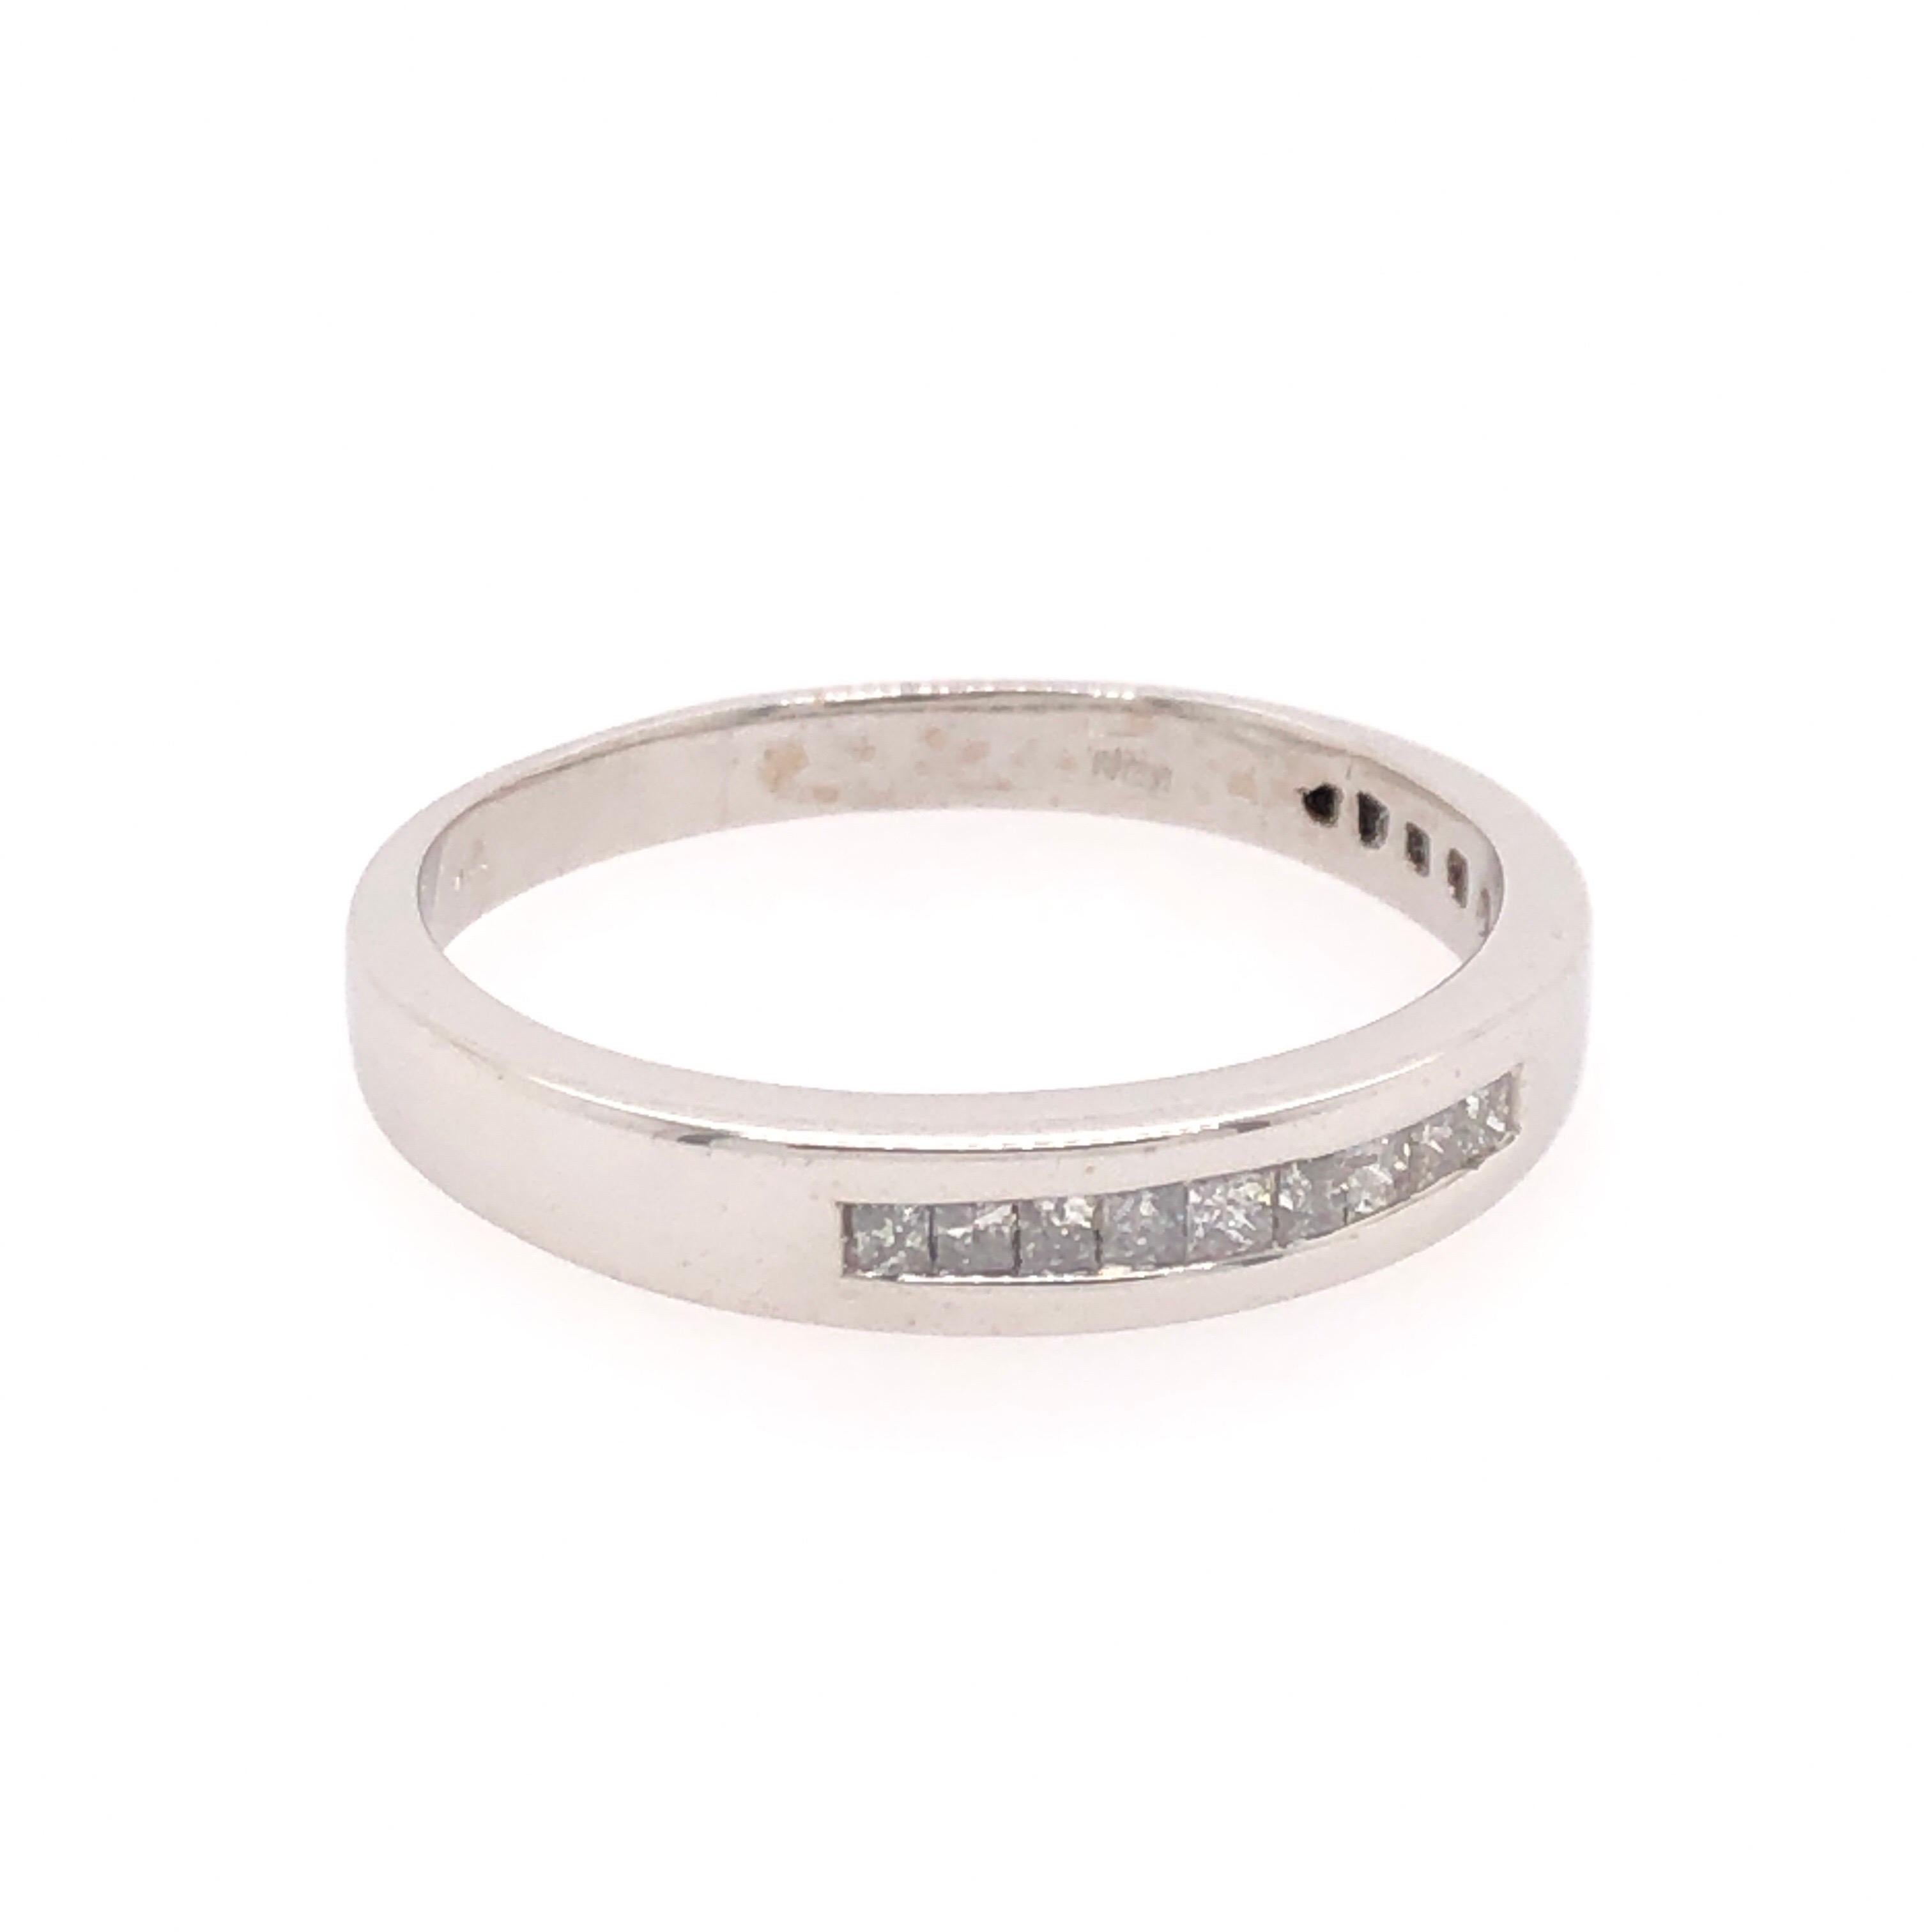 Clean with a touch of bling, this tapered 14K white gold men’s wedding band is perfect if you want an accent of diamonds without the fuss. Nine square diamonds with an estimated total of 0.16 CTS sit neatly in a row along the 14K white gold band.